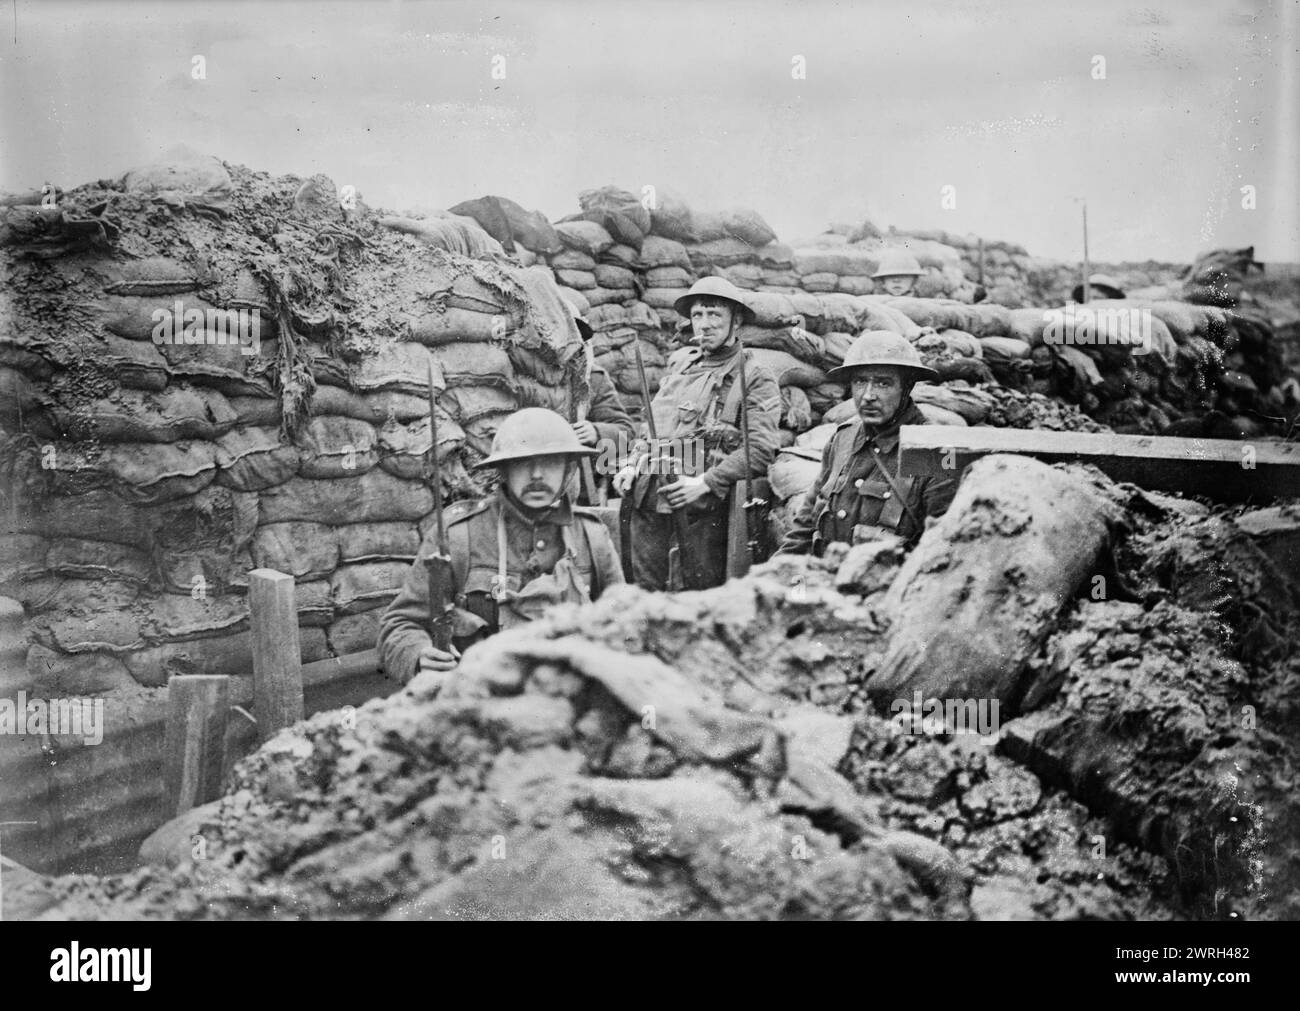 France - in a front line trench, 1917. British troops in a trench in France during World War I. Stock Photo